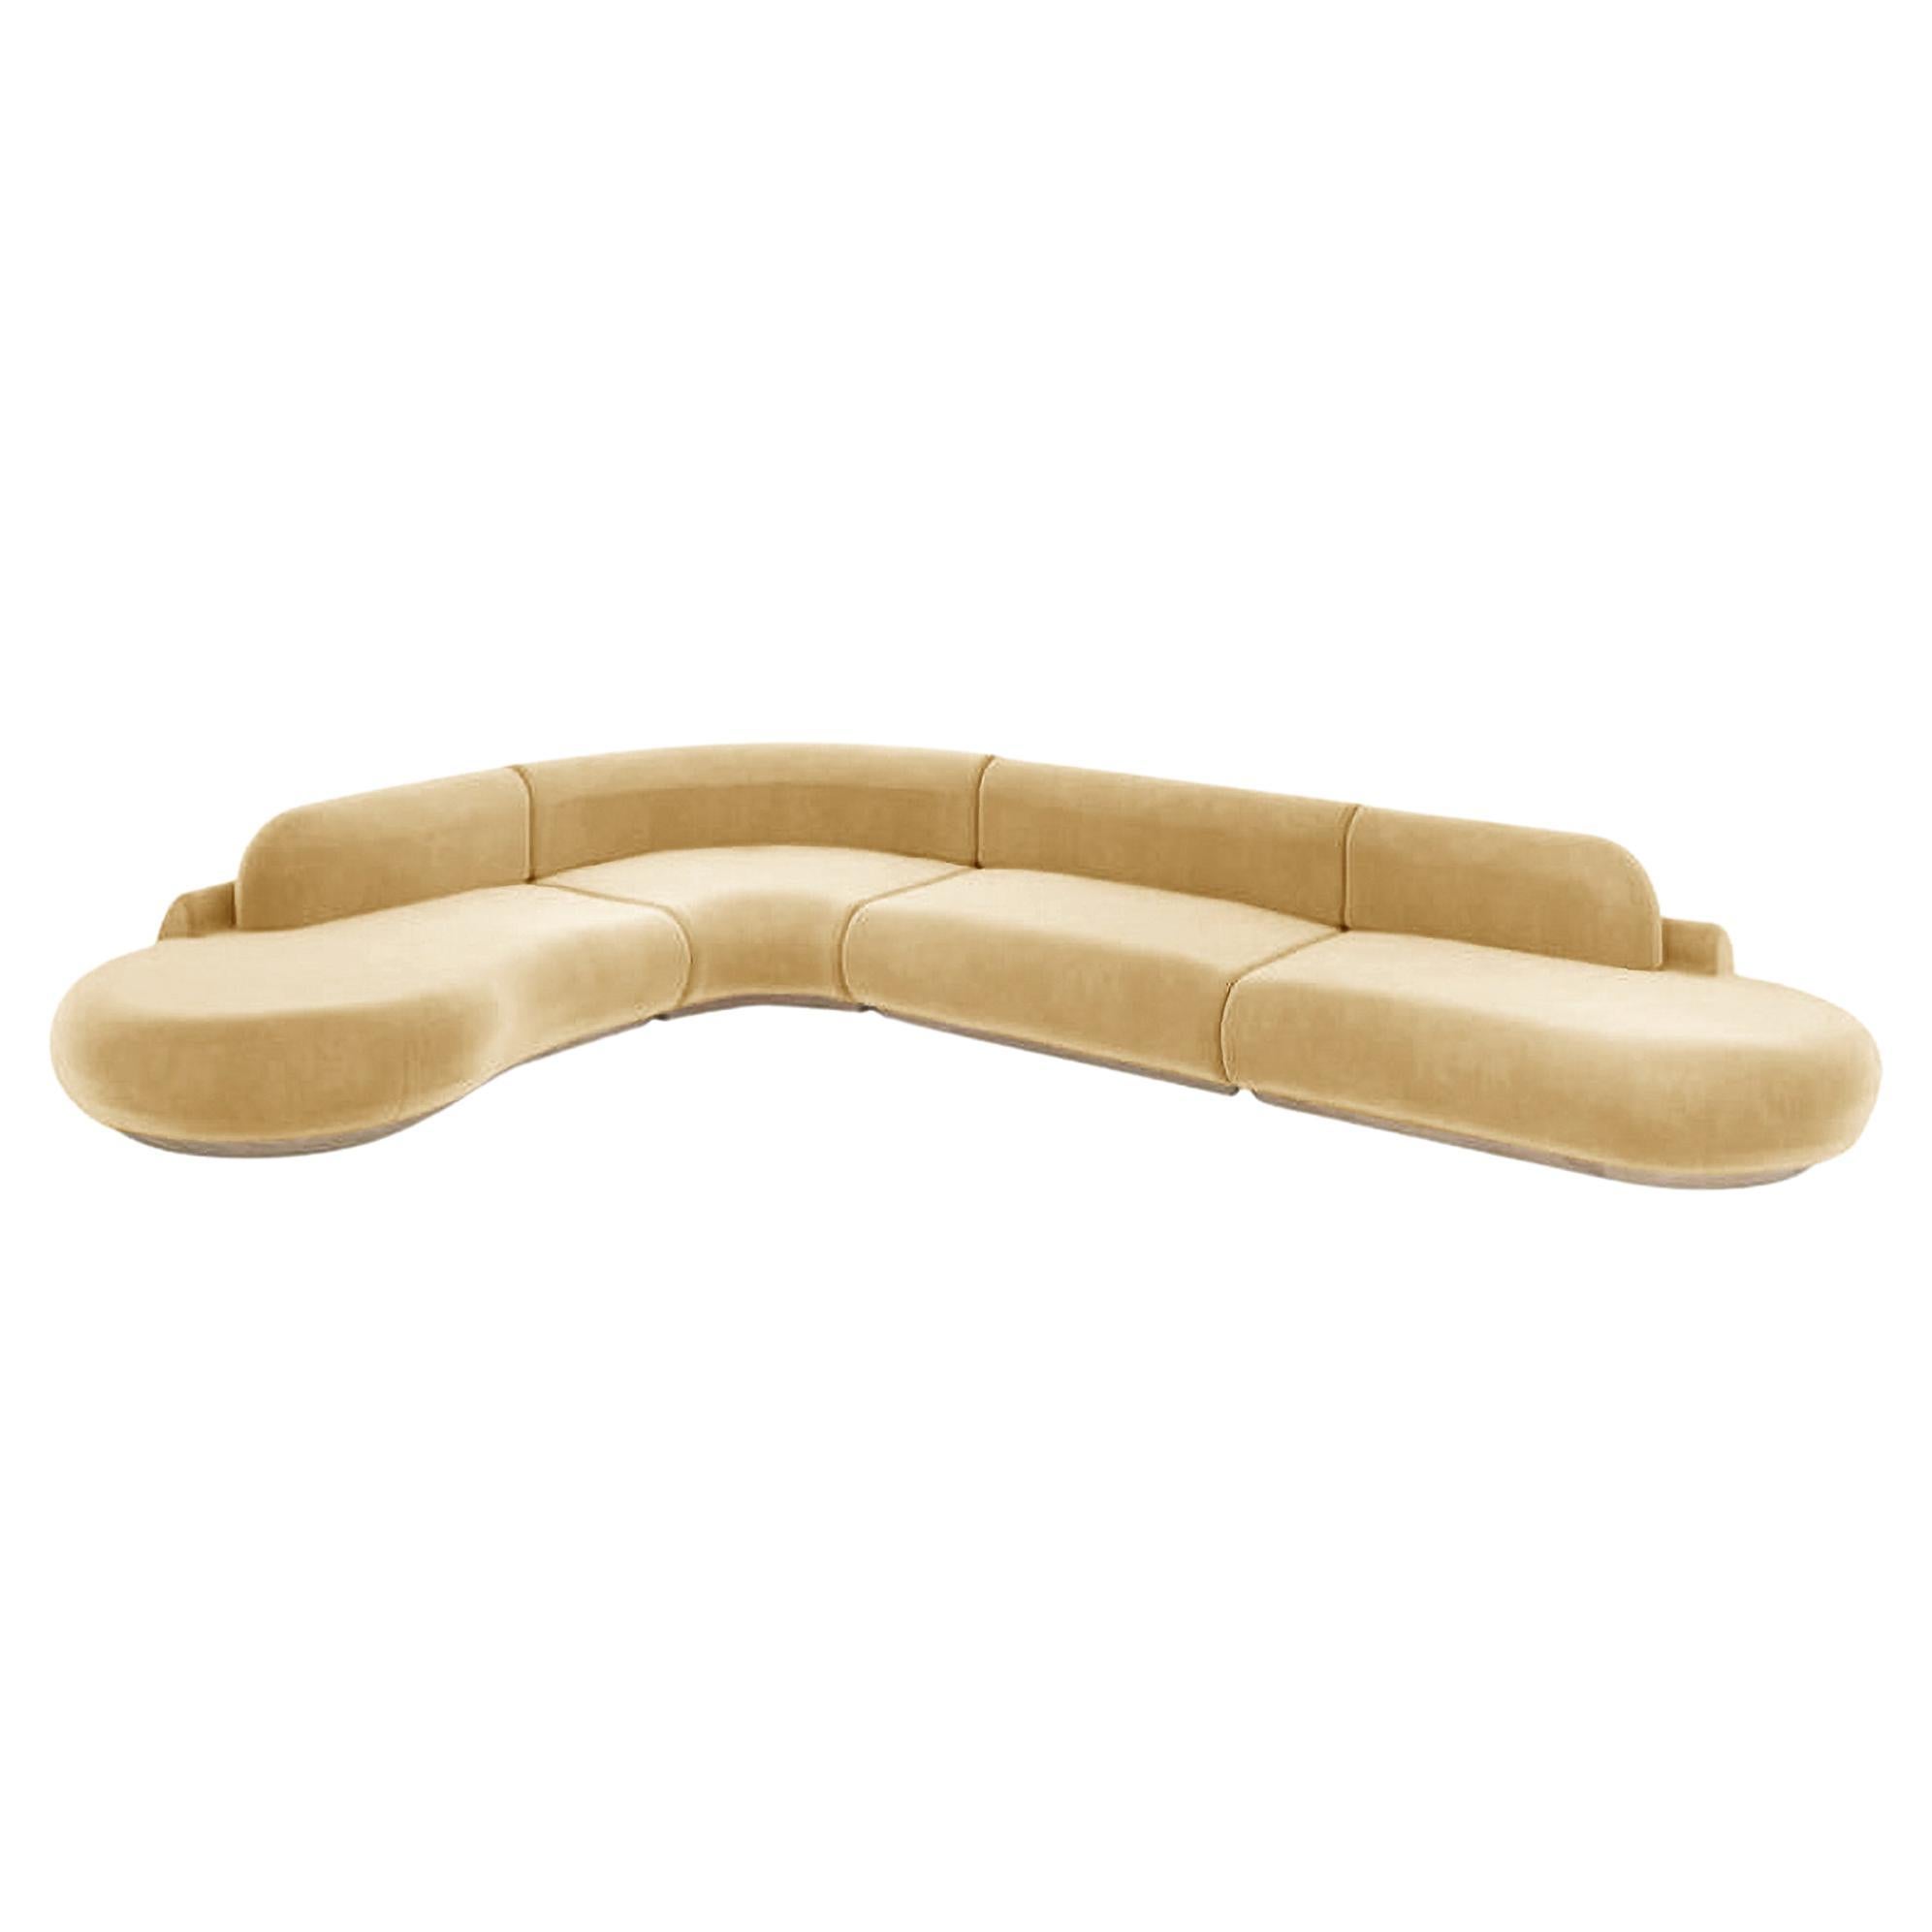 Naked Curved Sectional Sofa, 4 Piece with Natural Oak and Vigo Plantain For Sale